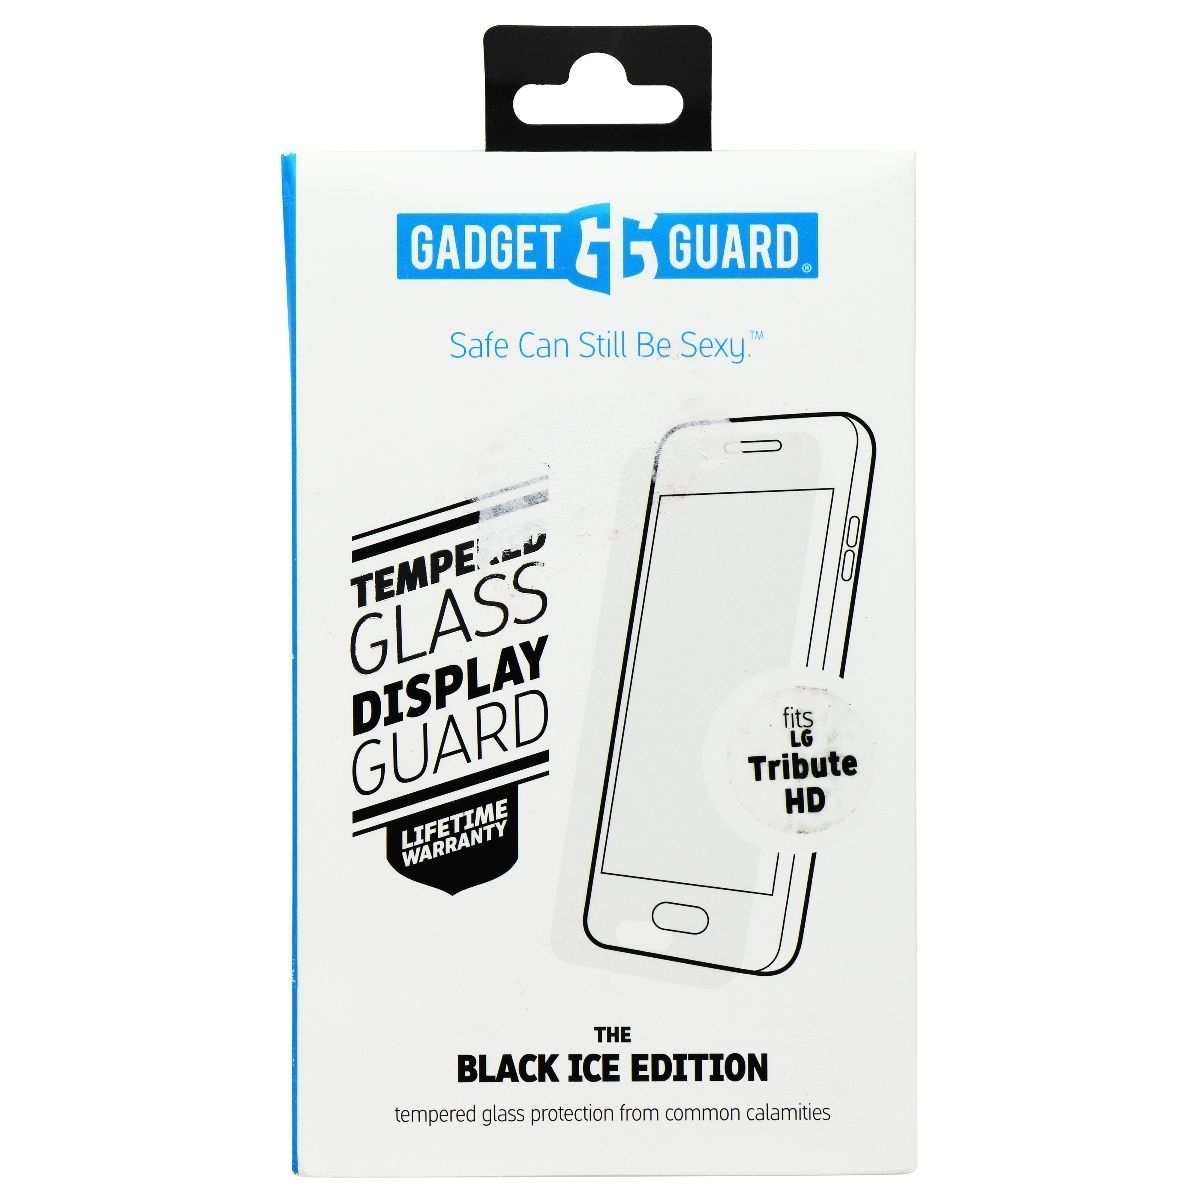 Gadget Guard Black Ice Tempered Glass For LG Tribute HD - Clear (Refurbished)